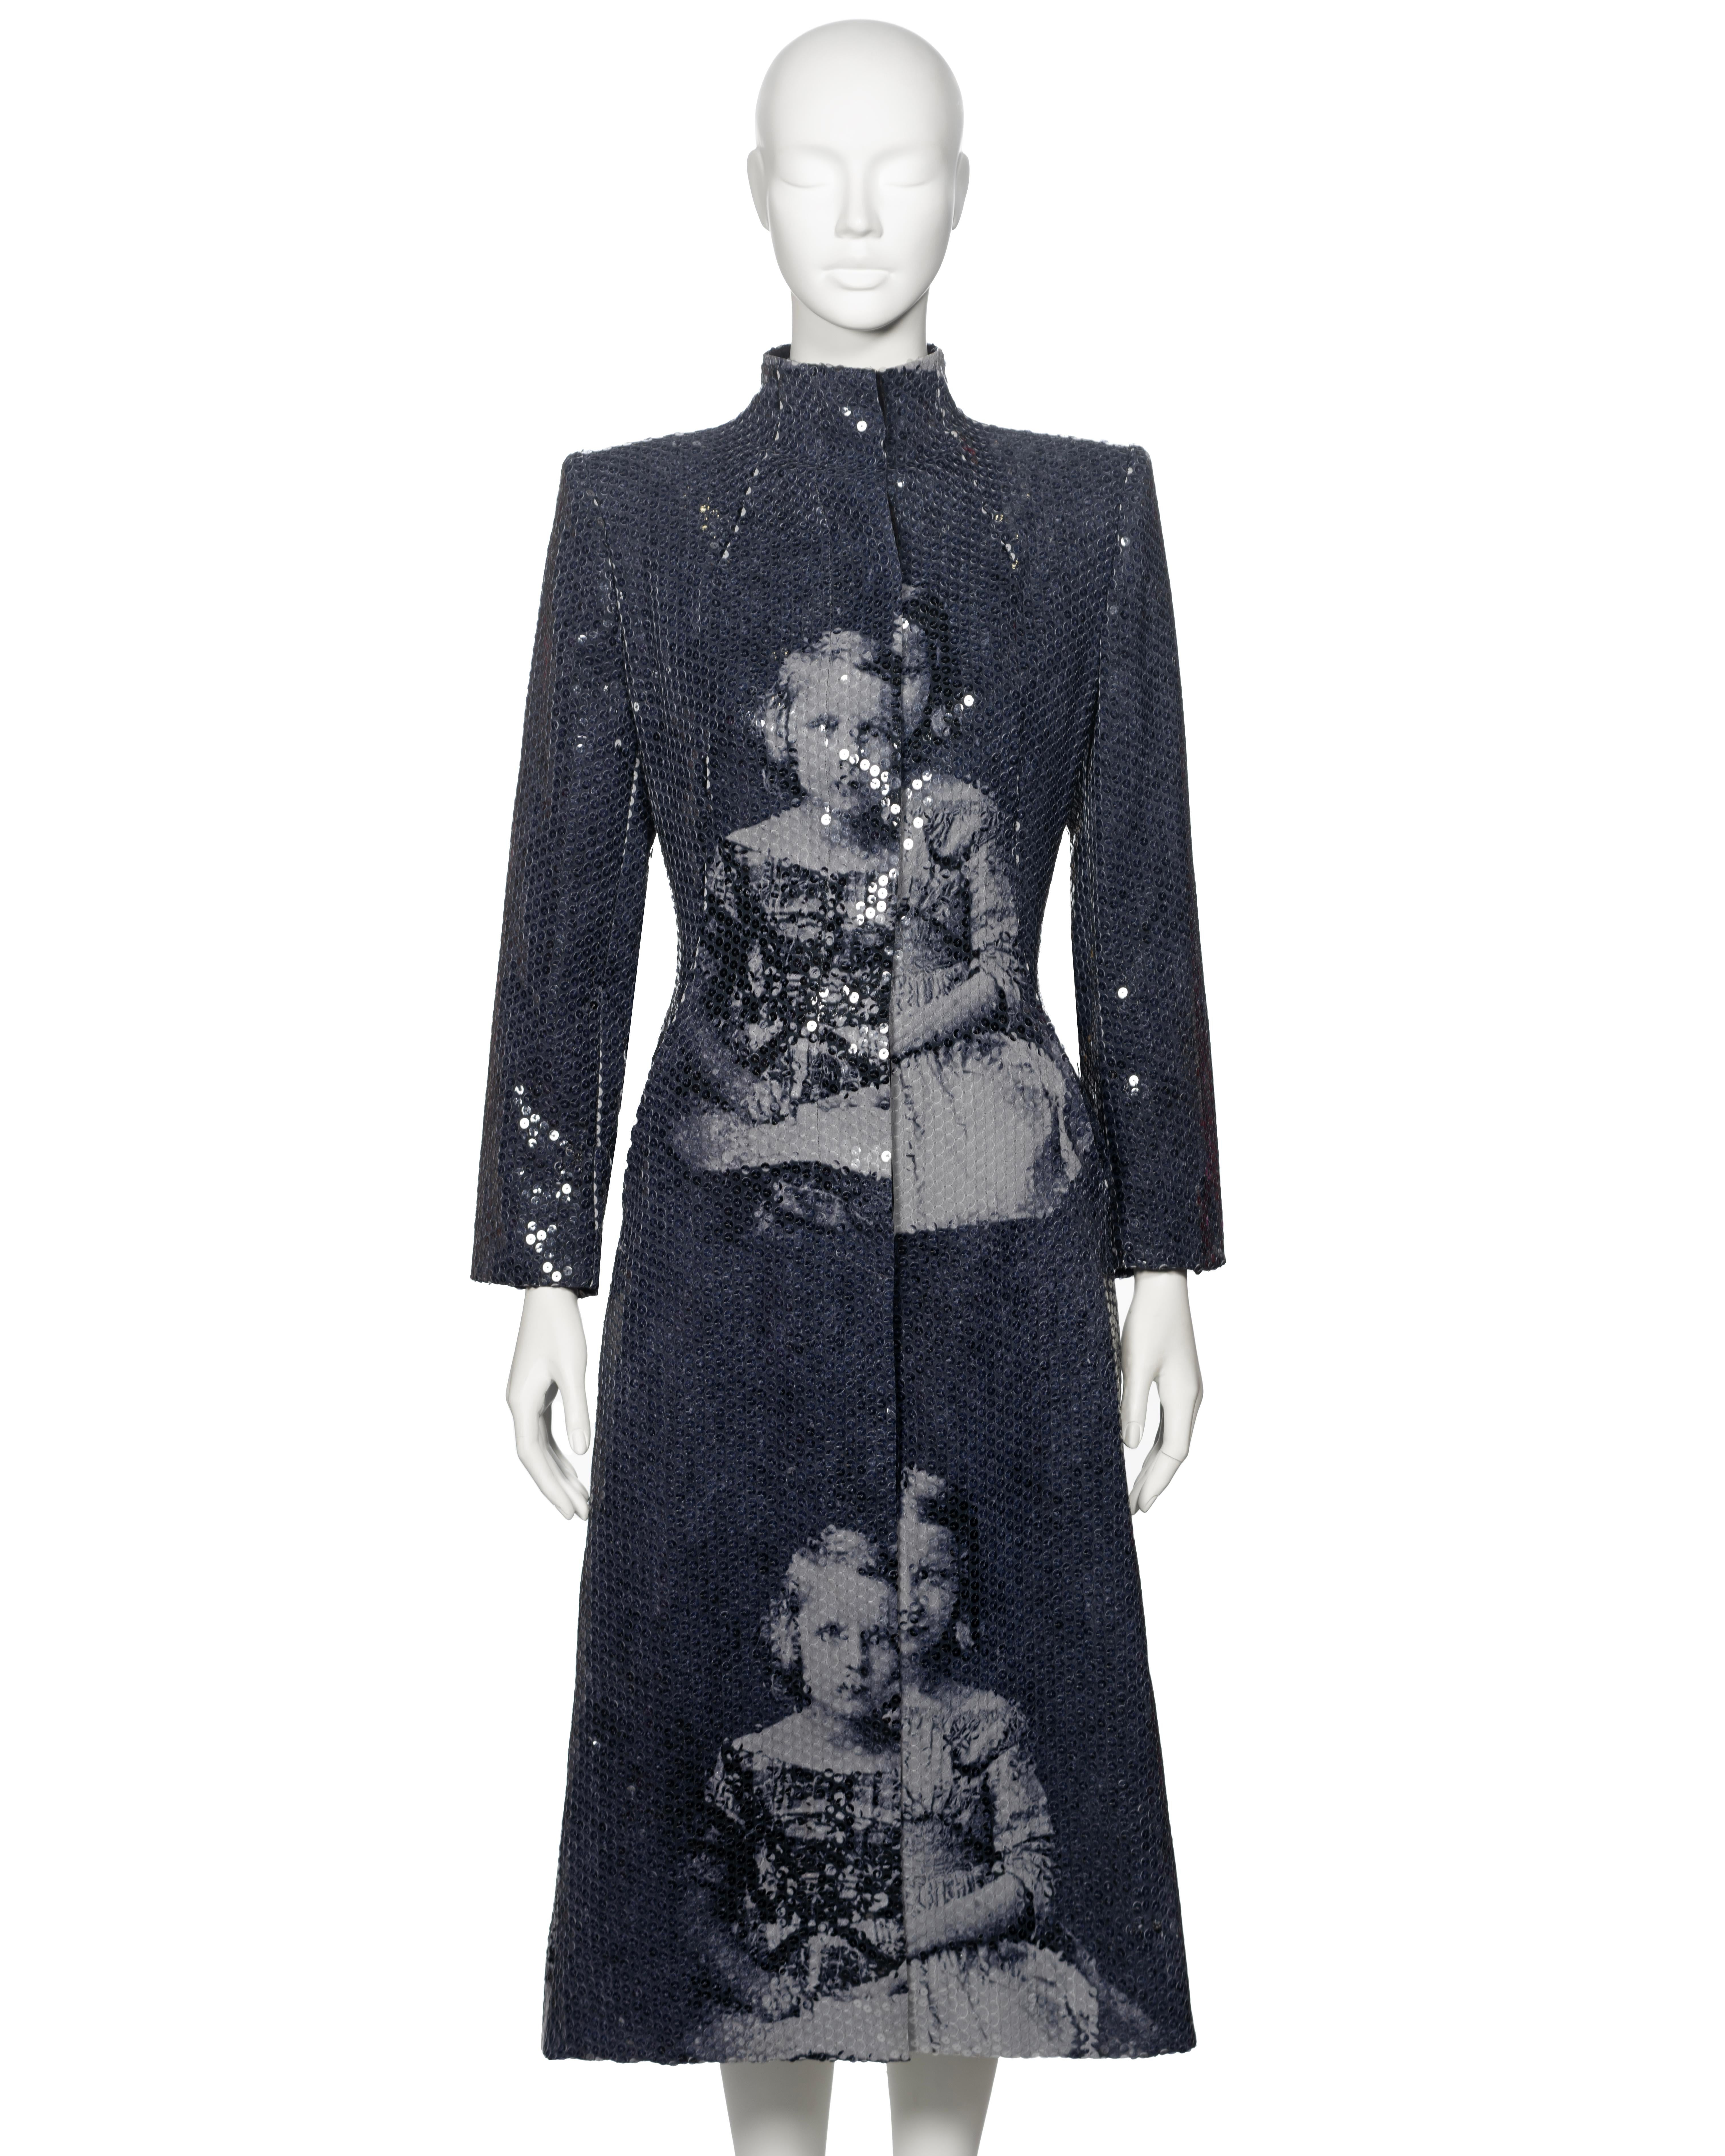 ▪ Archival Alexander McQueen Sequin Evening Coat
▪ Creative Director: Alexander McQueen
▪ Joan Collection, Fall-Winter 1998
▪ Sold by One of a Kind Archive
▪ Museum Grade 
▪ Sequins printed with the 1845 image of three girls by photographer Carl